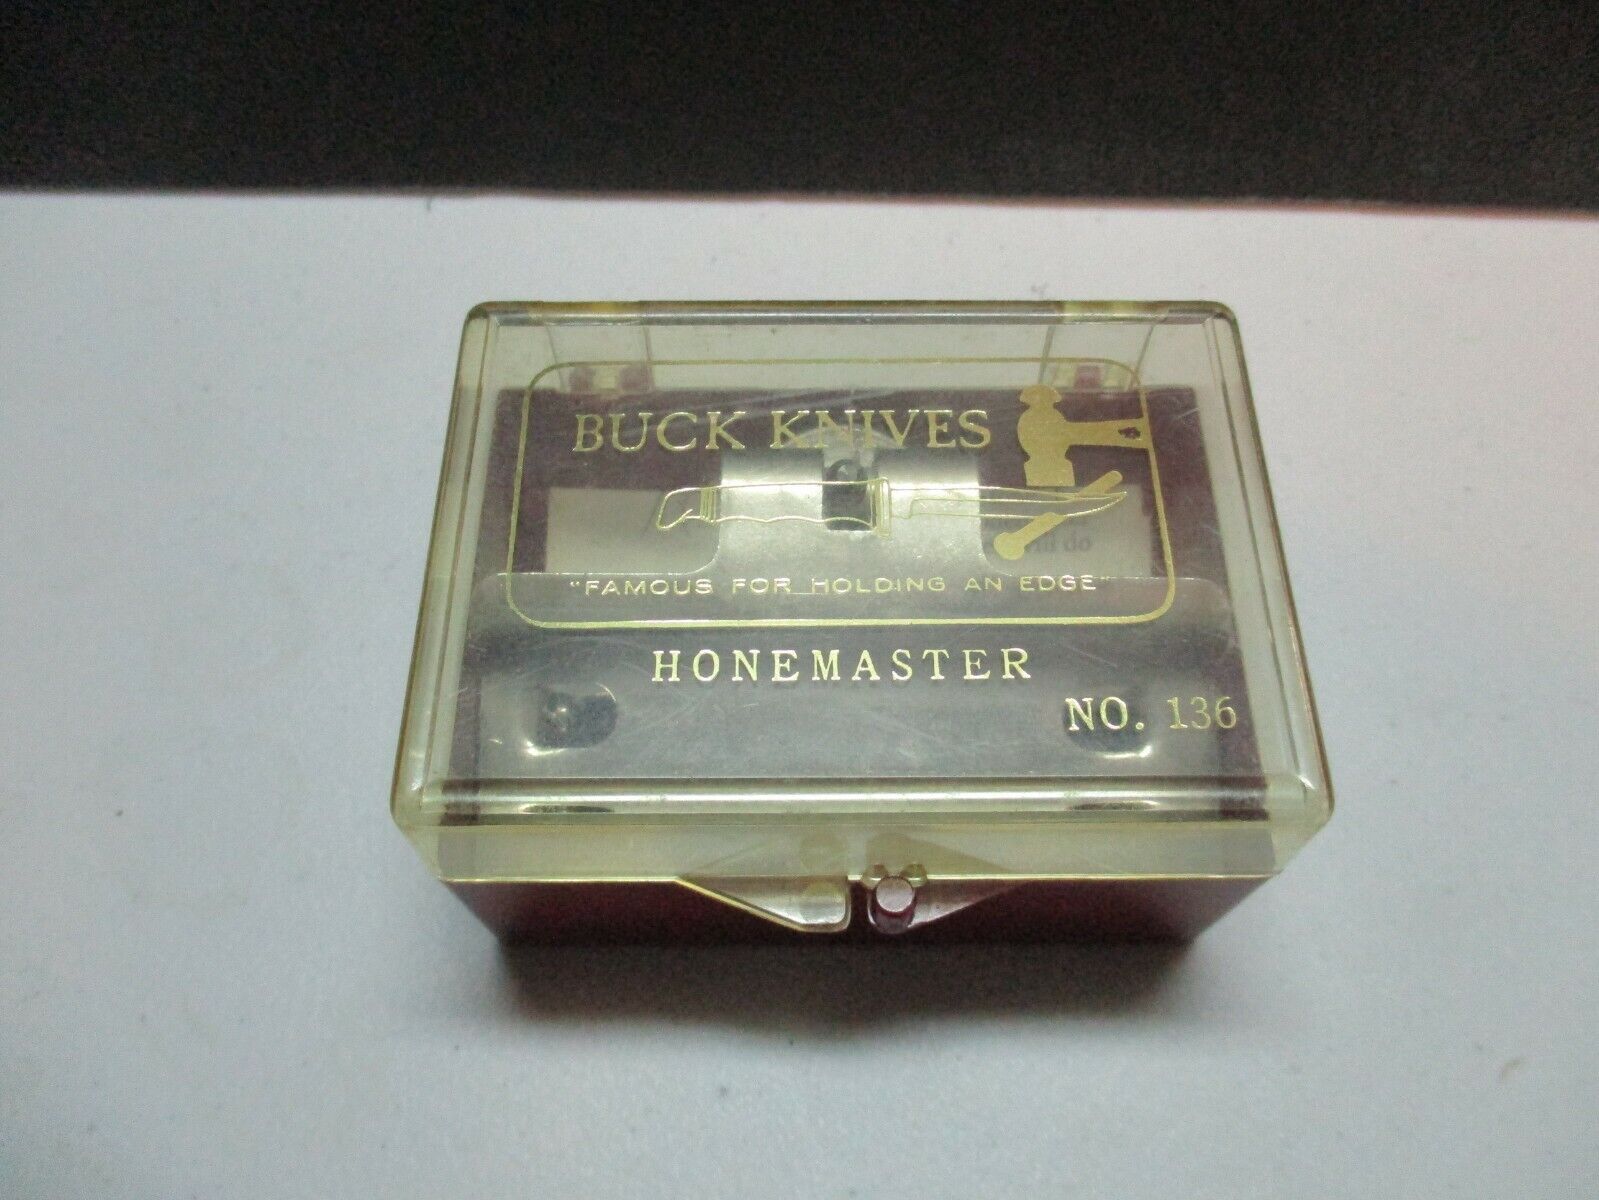 Buck Honemaster No. 136  in box, with instructions